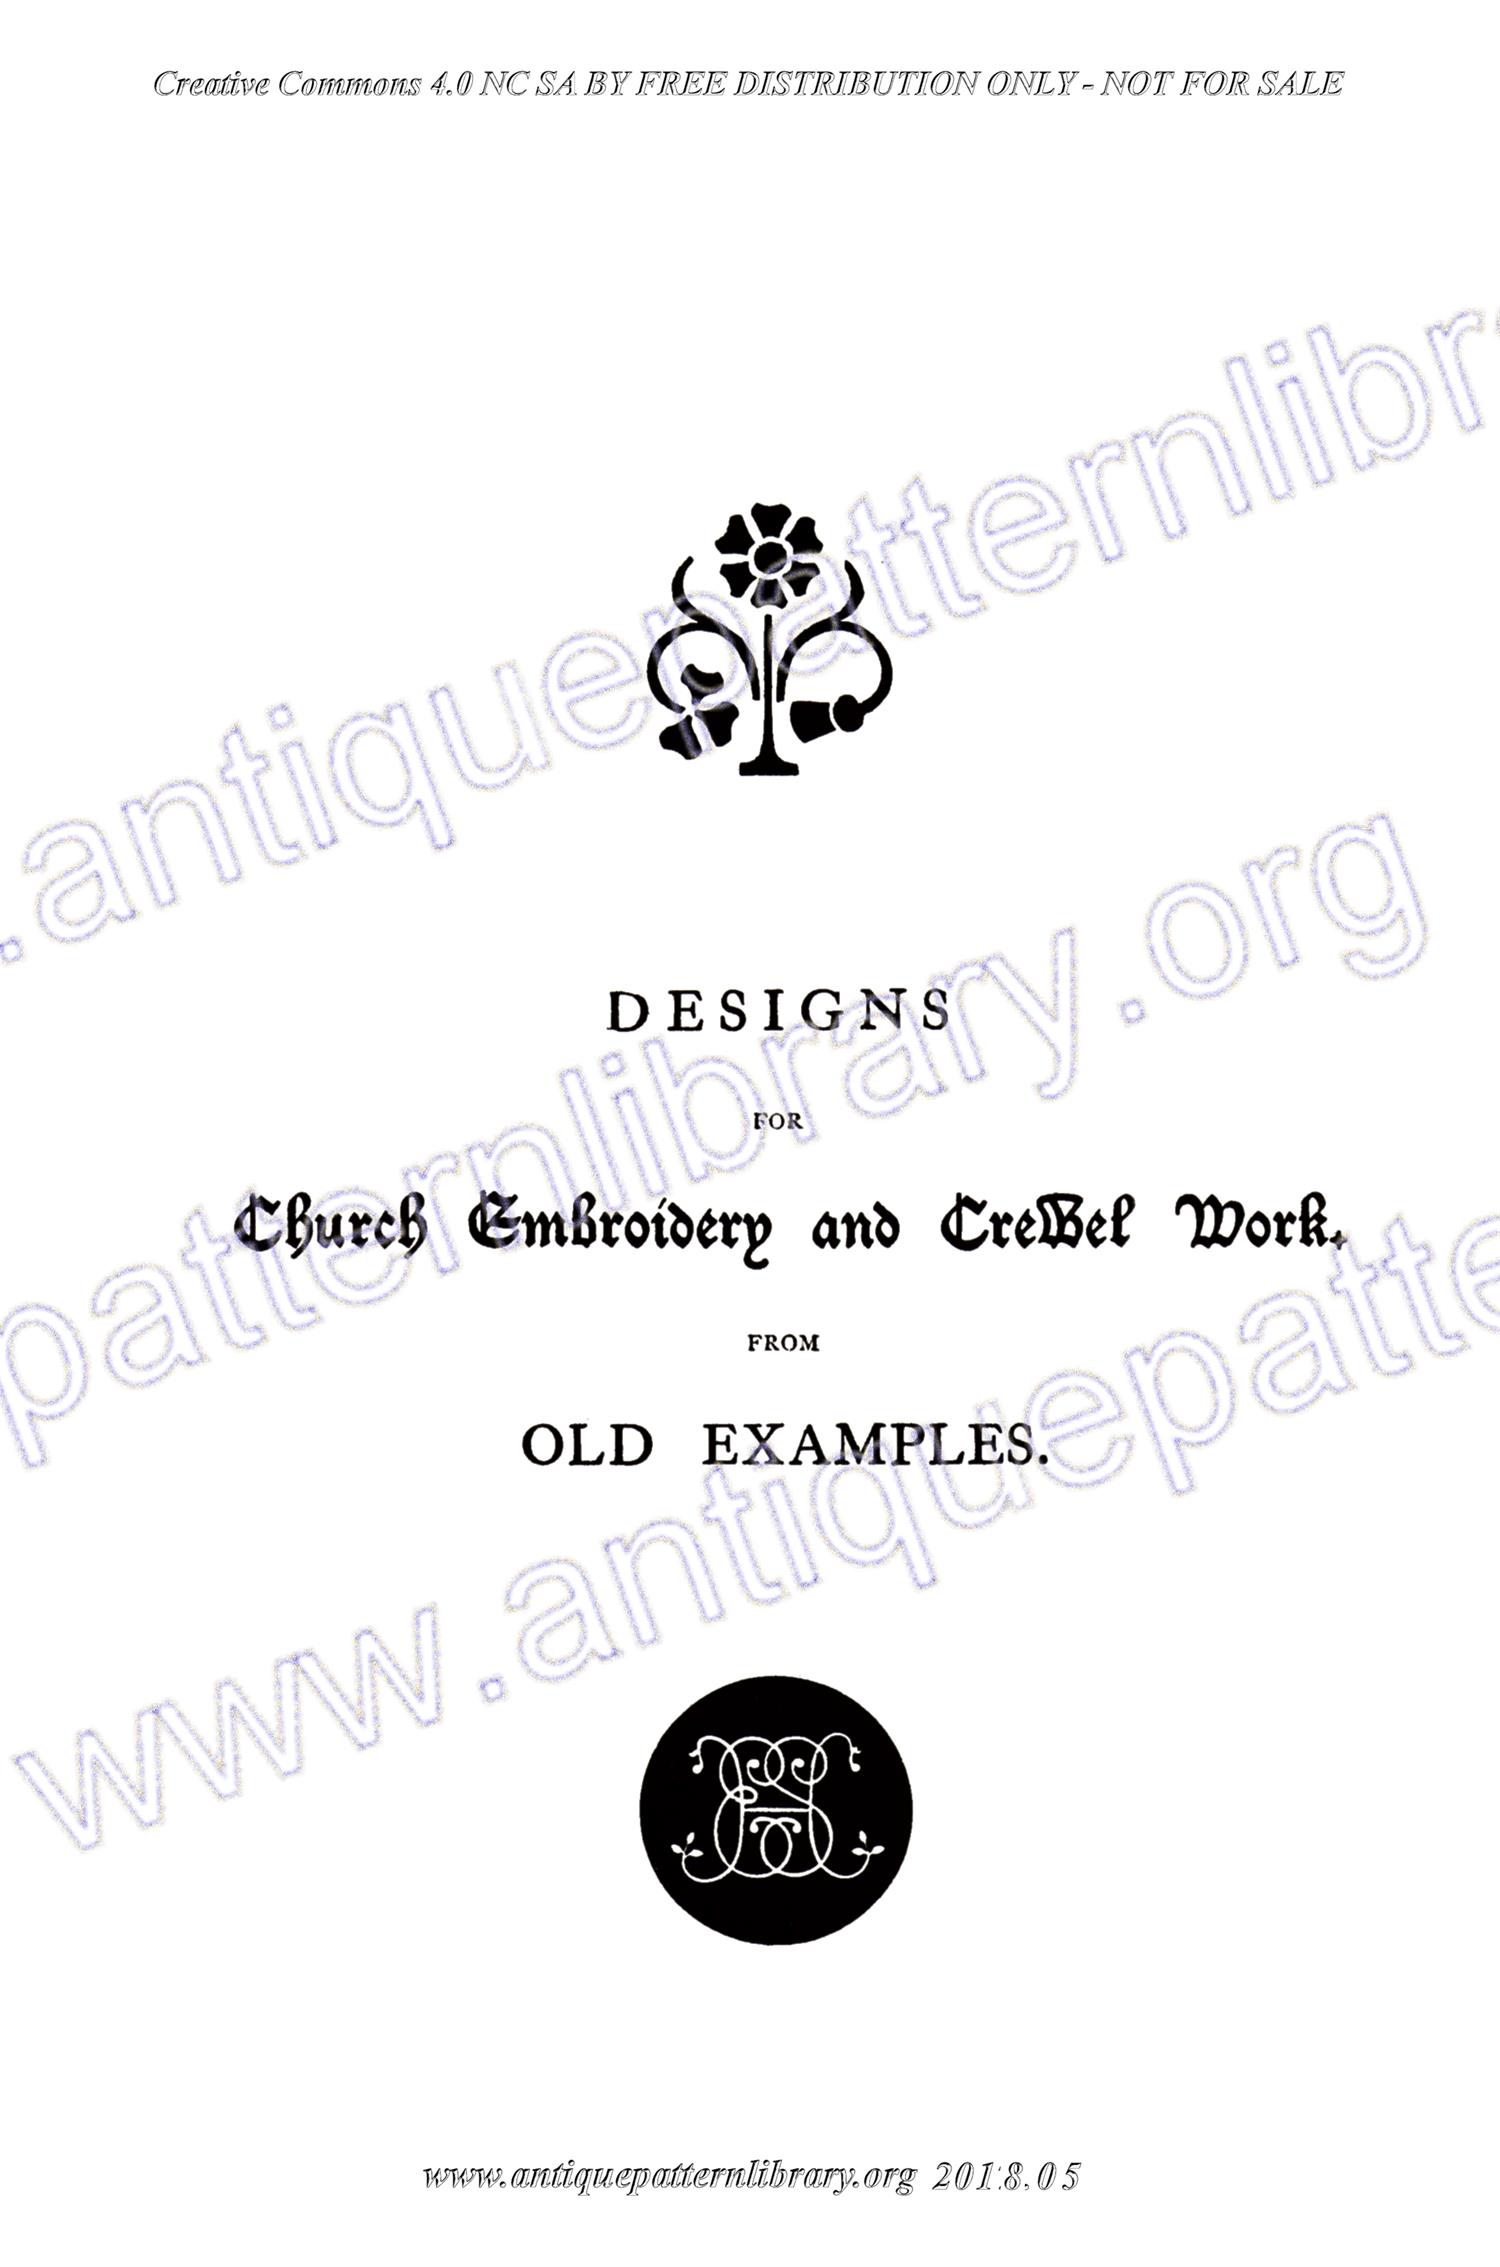 I-WM002 Needlework Designs from Old Examples